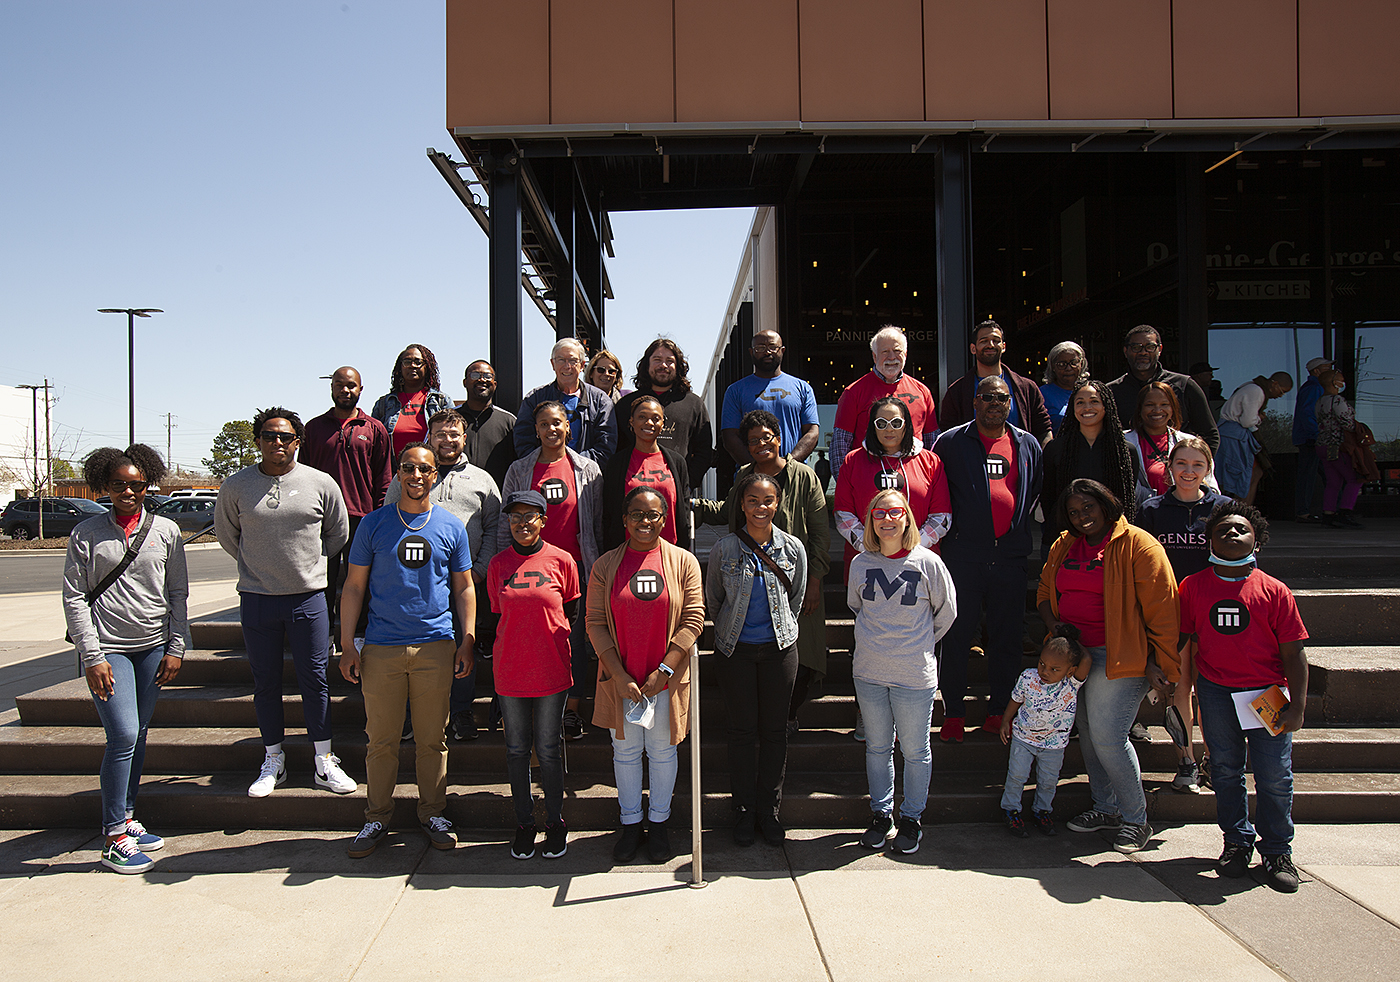 Group Image of students, faculty, and community members who went on the trip